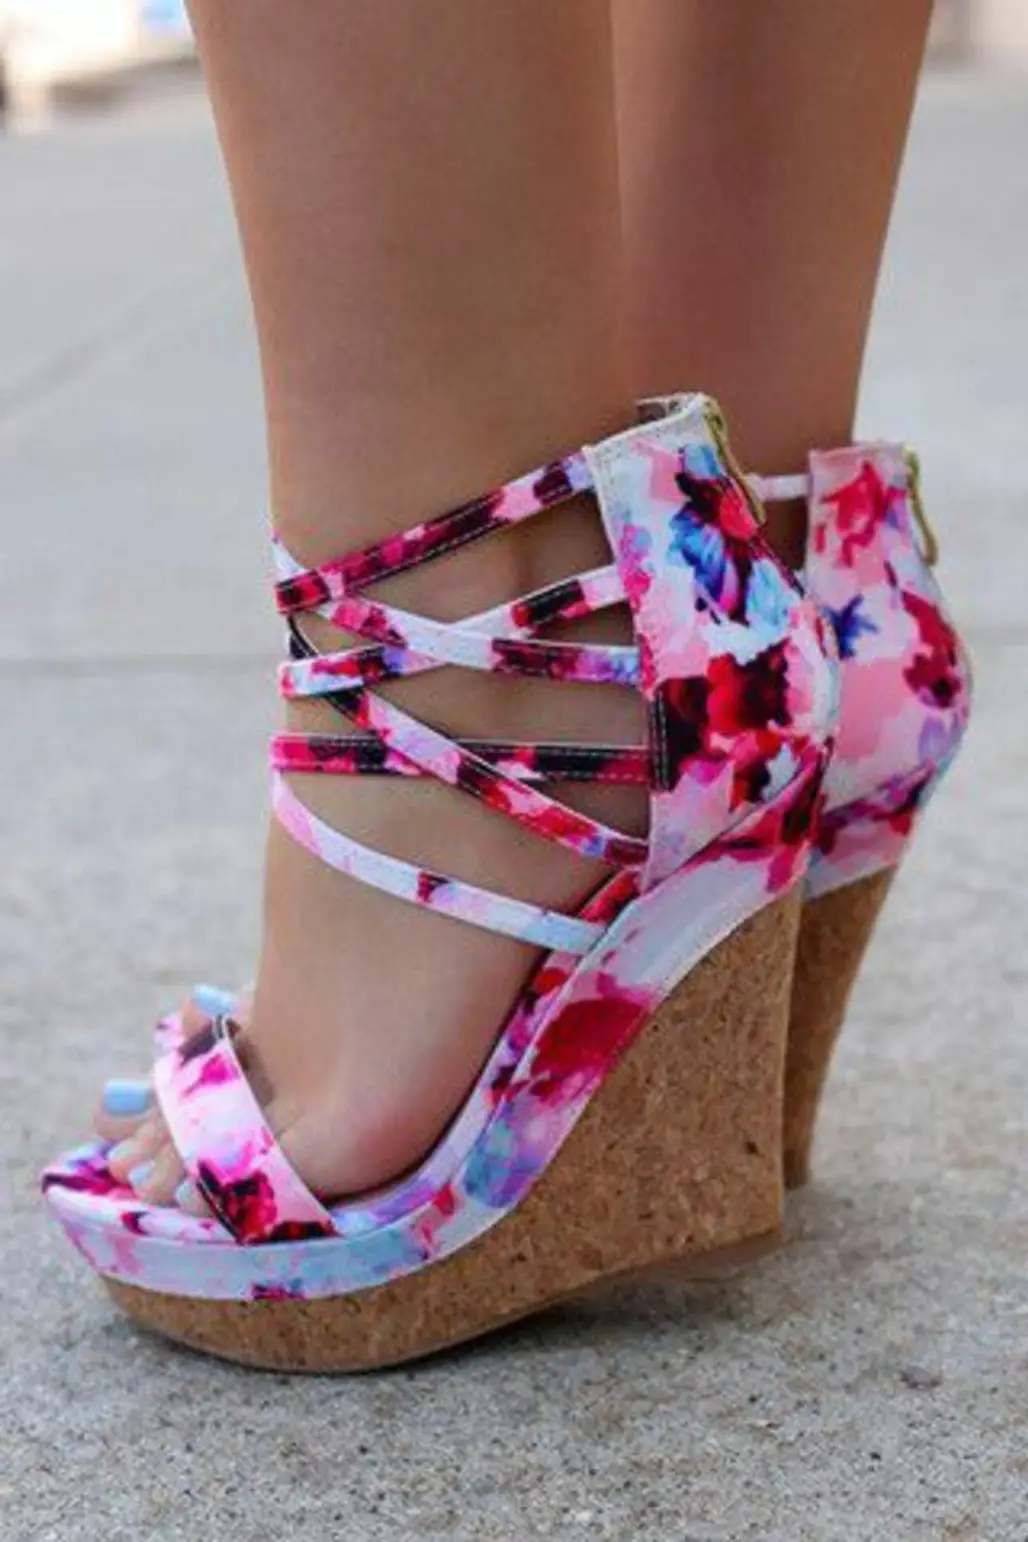 Pretty Wedges Are a Must-Have